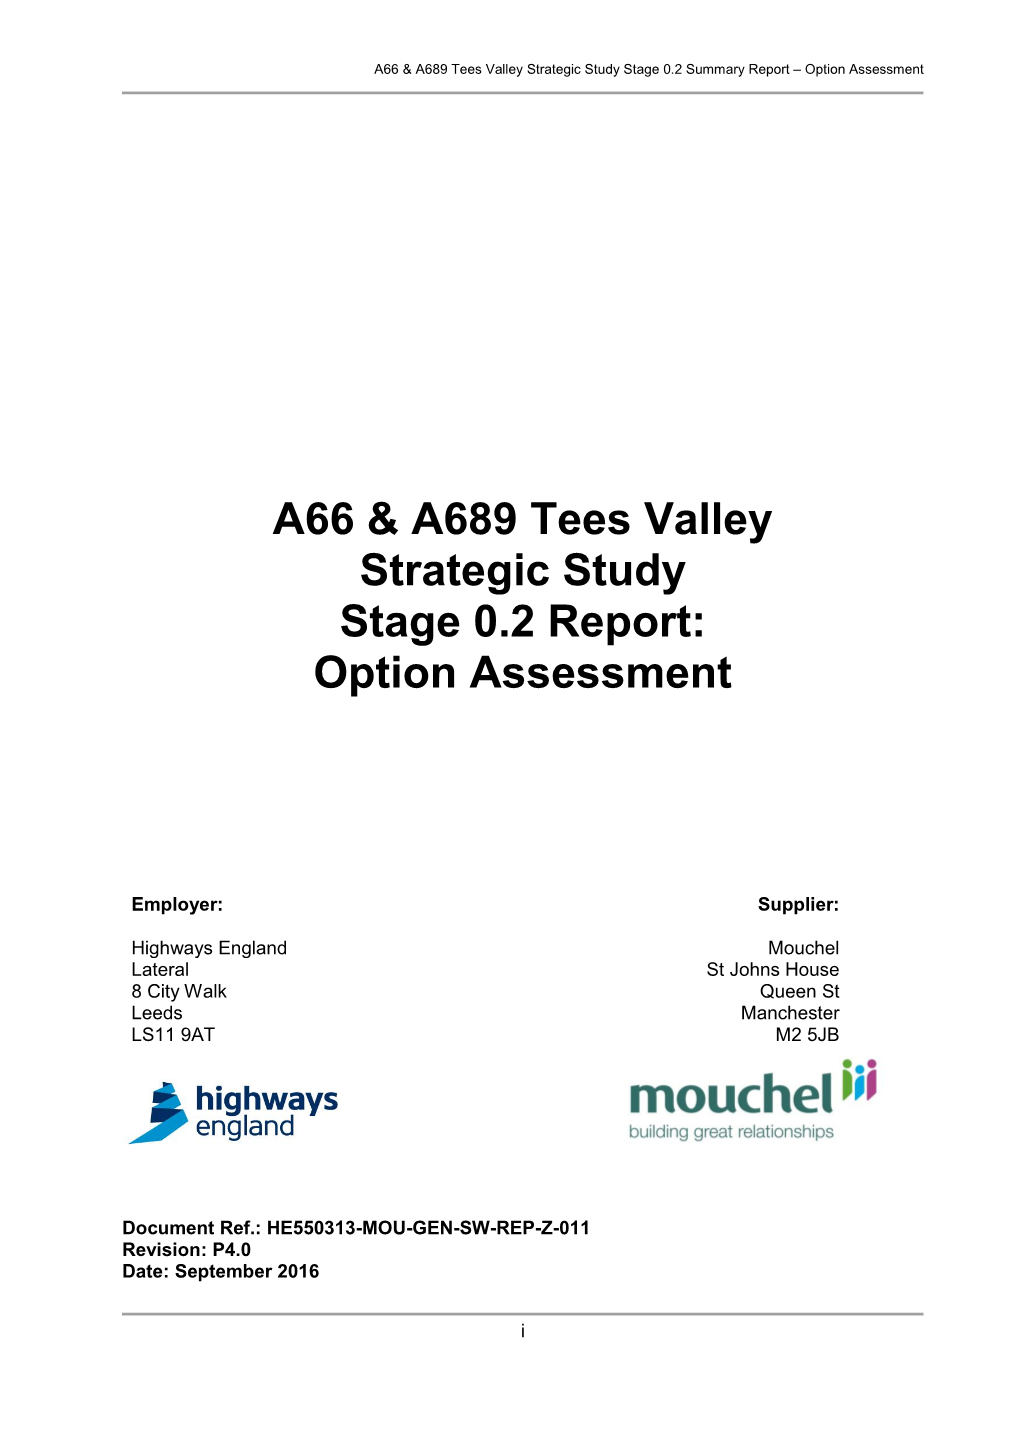 A66 & A689 Tees Valley Strategic Study Stage 0.2 Report: Option